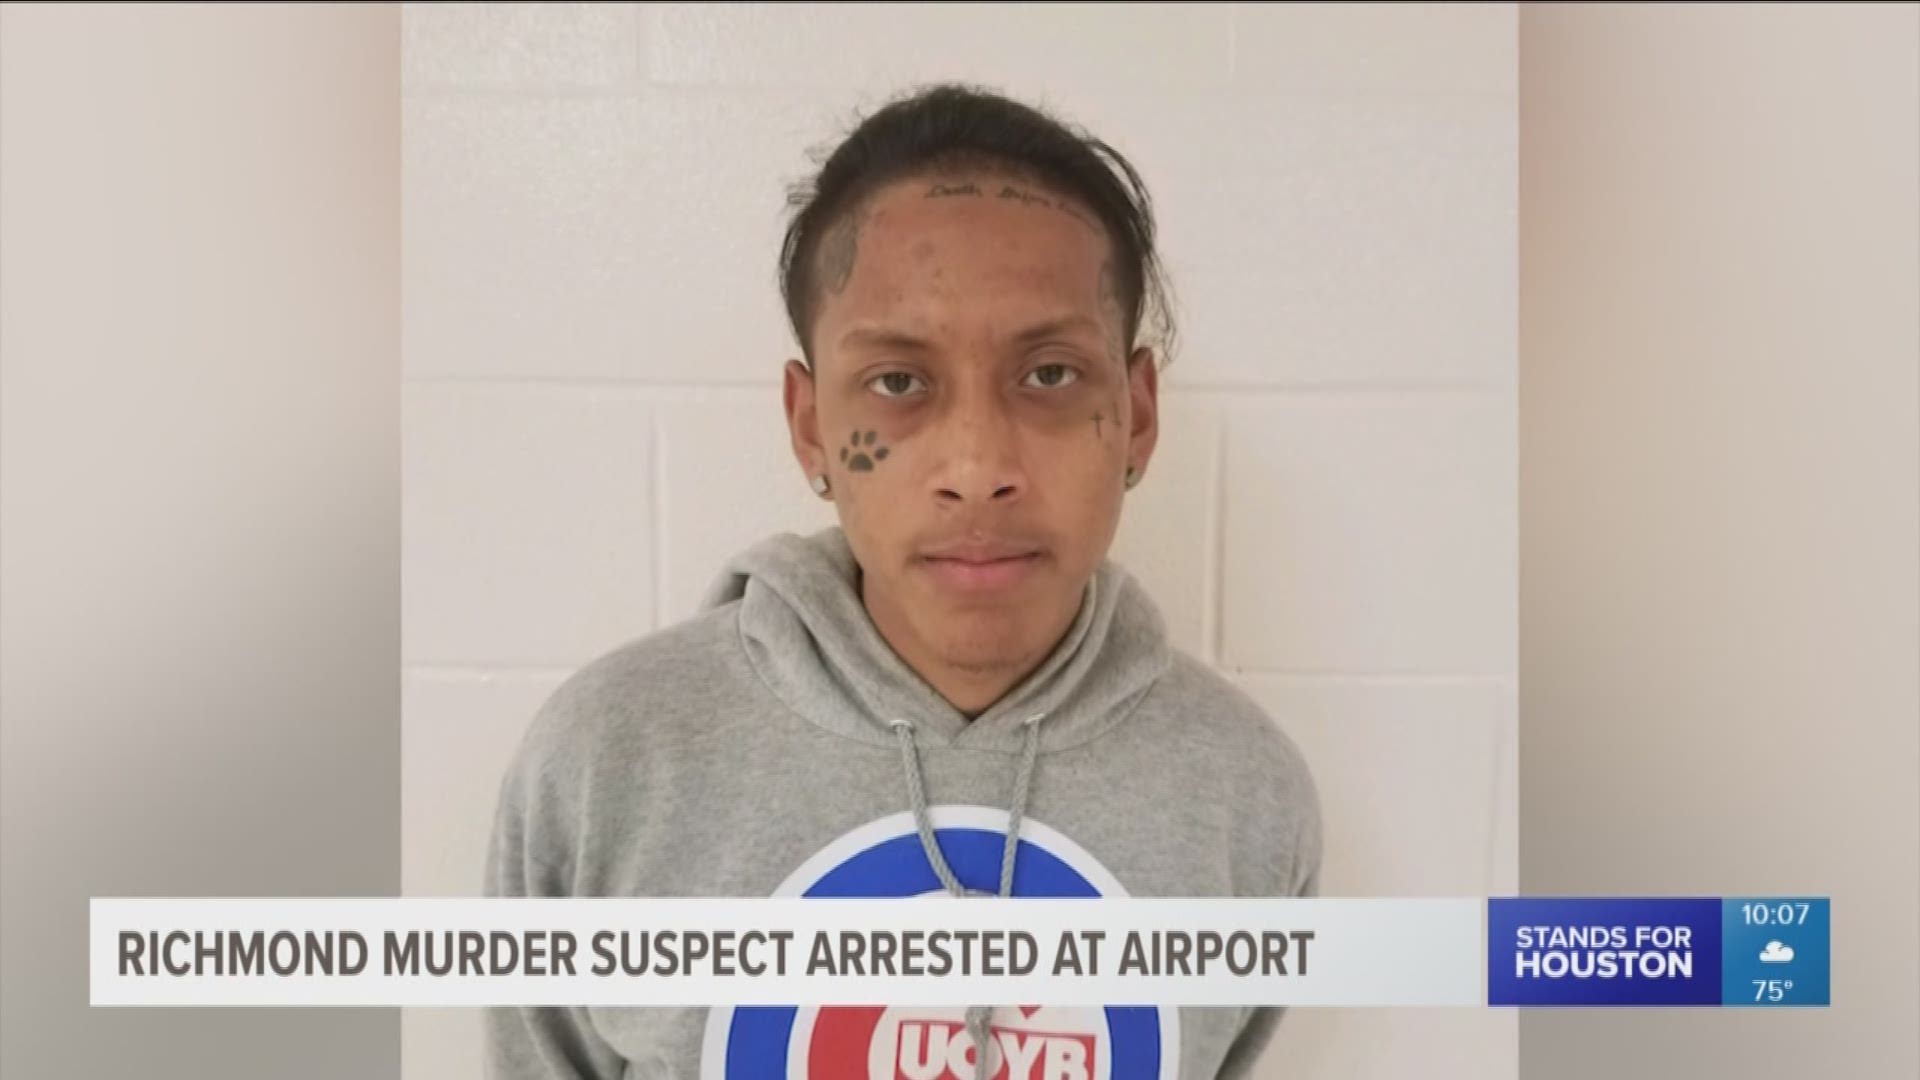 Rigoberto Rauda, 18, was taken into custody around 6 a.m. at Bush Intercontinental Airport for the murder of 23-year-old Albany Andres Sosa.